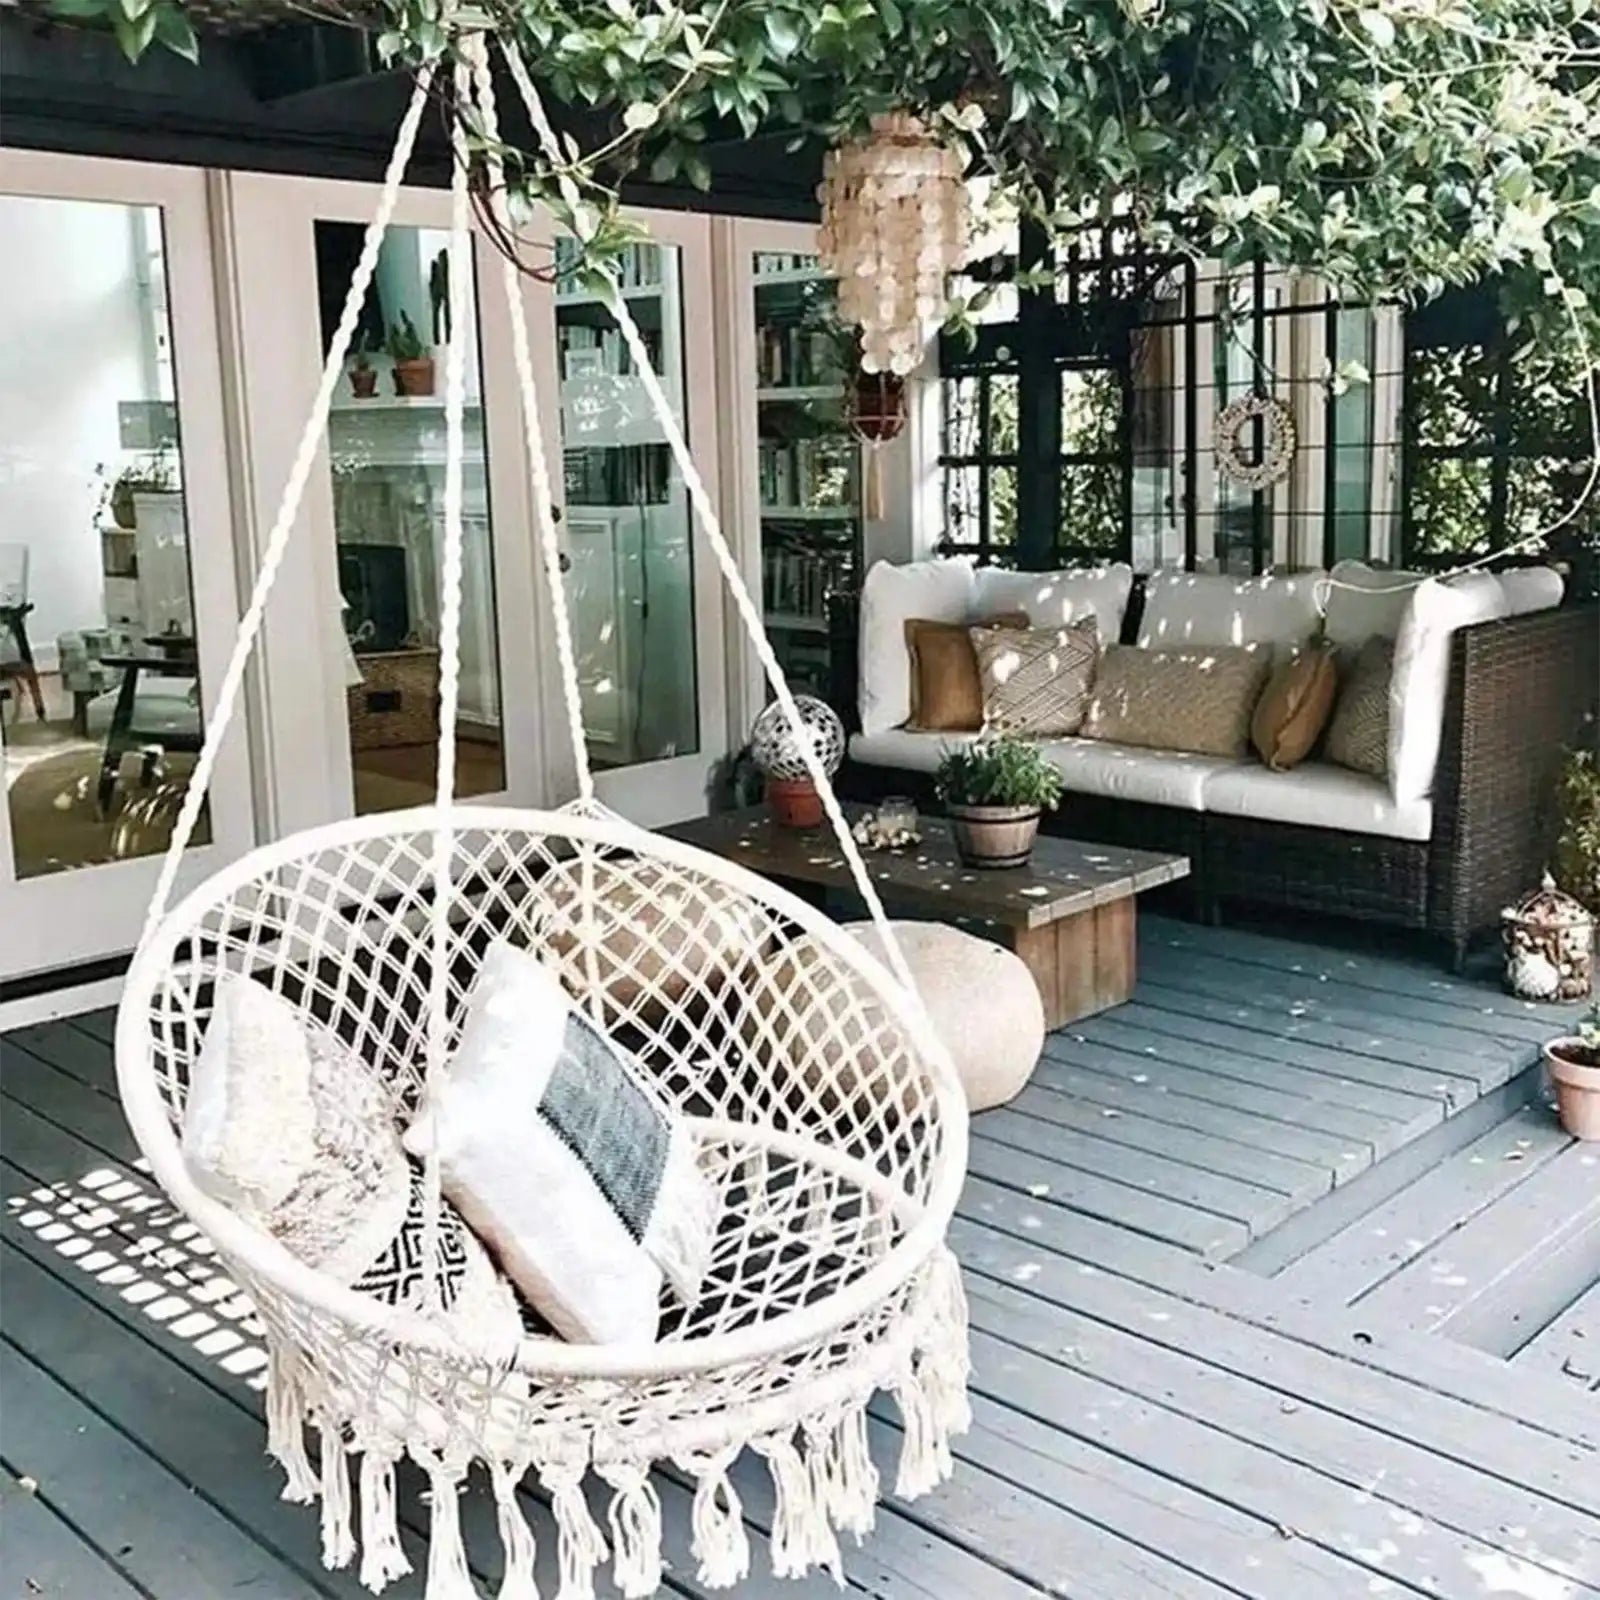 Hammock Chair Macrame Swing, Handmade Knitted Hanging Cotton Rope Chair for Indoor/Outdoor Home Patio Deck Yard Garden Reading Leisure